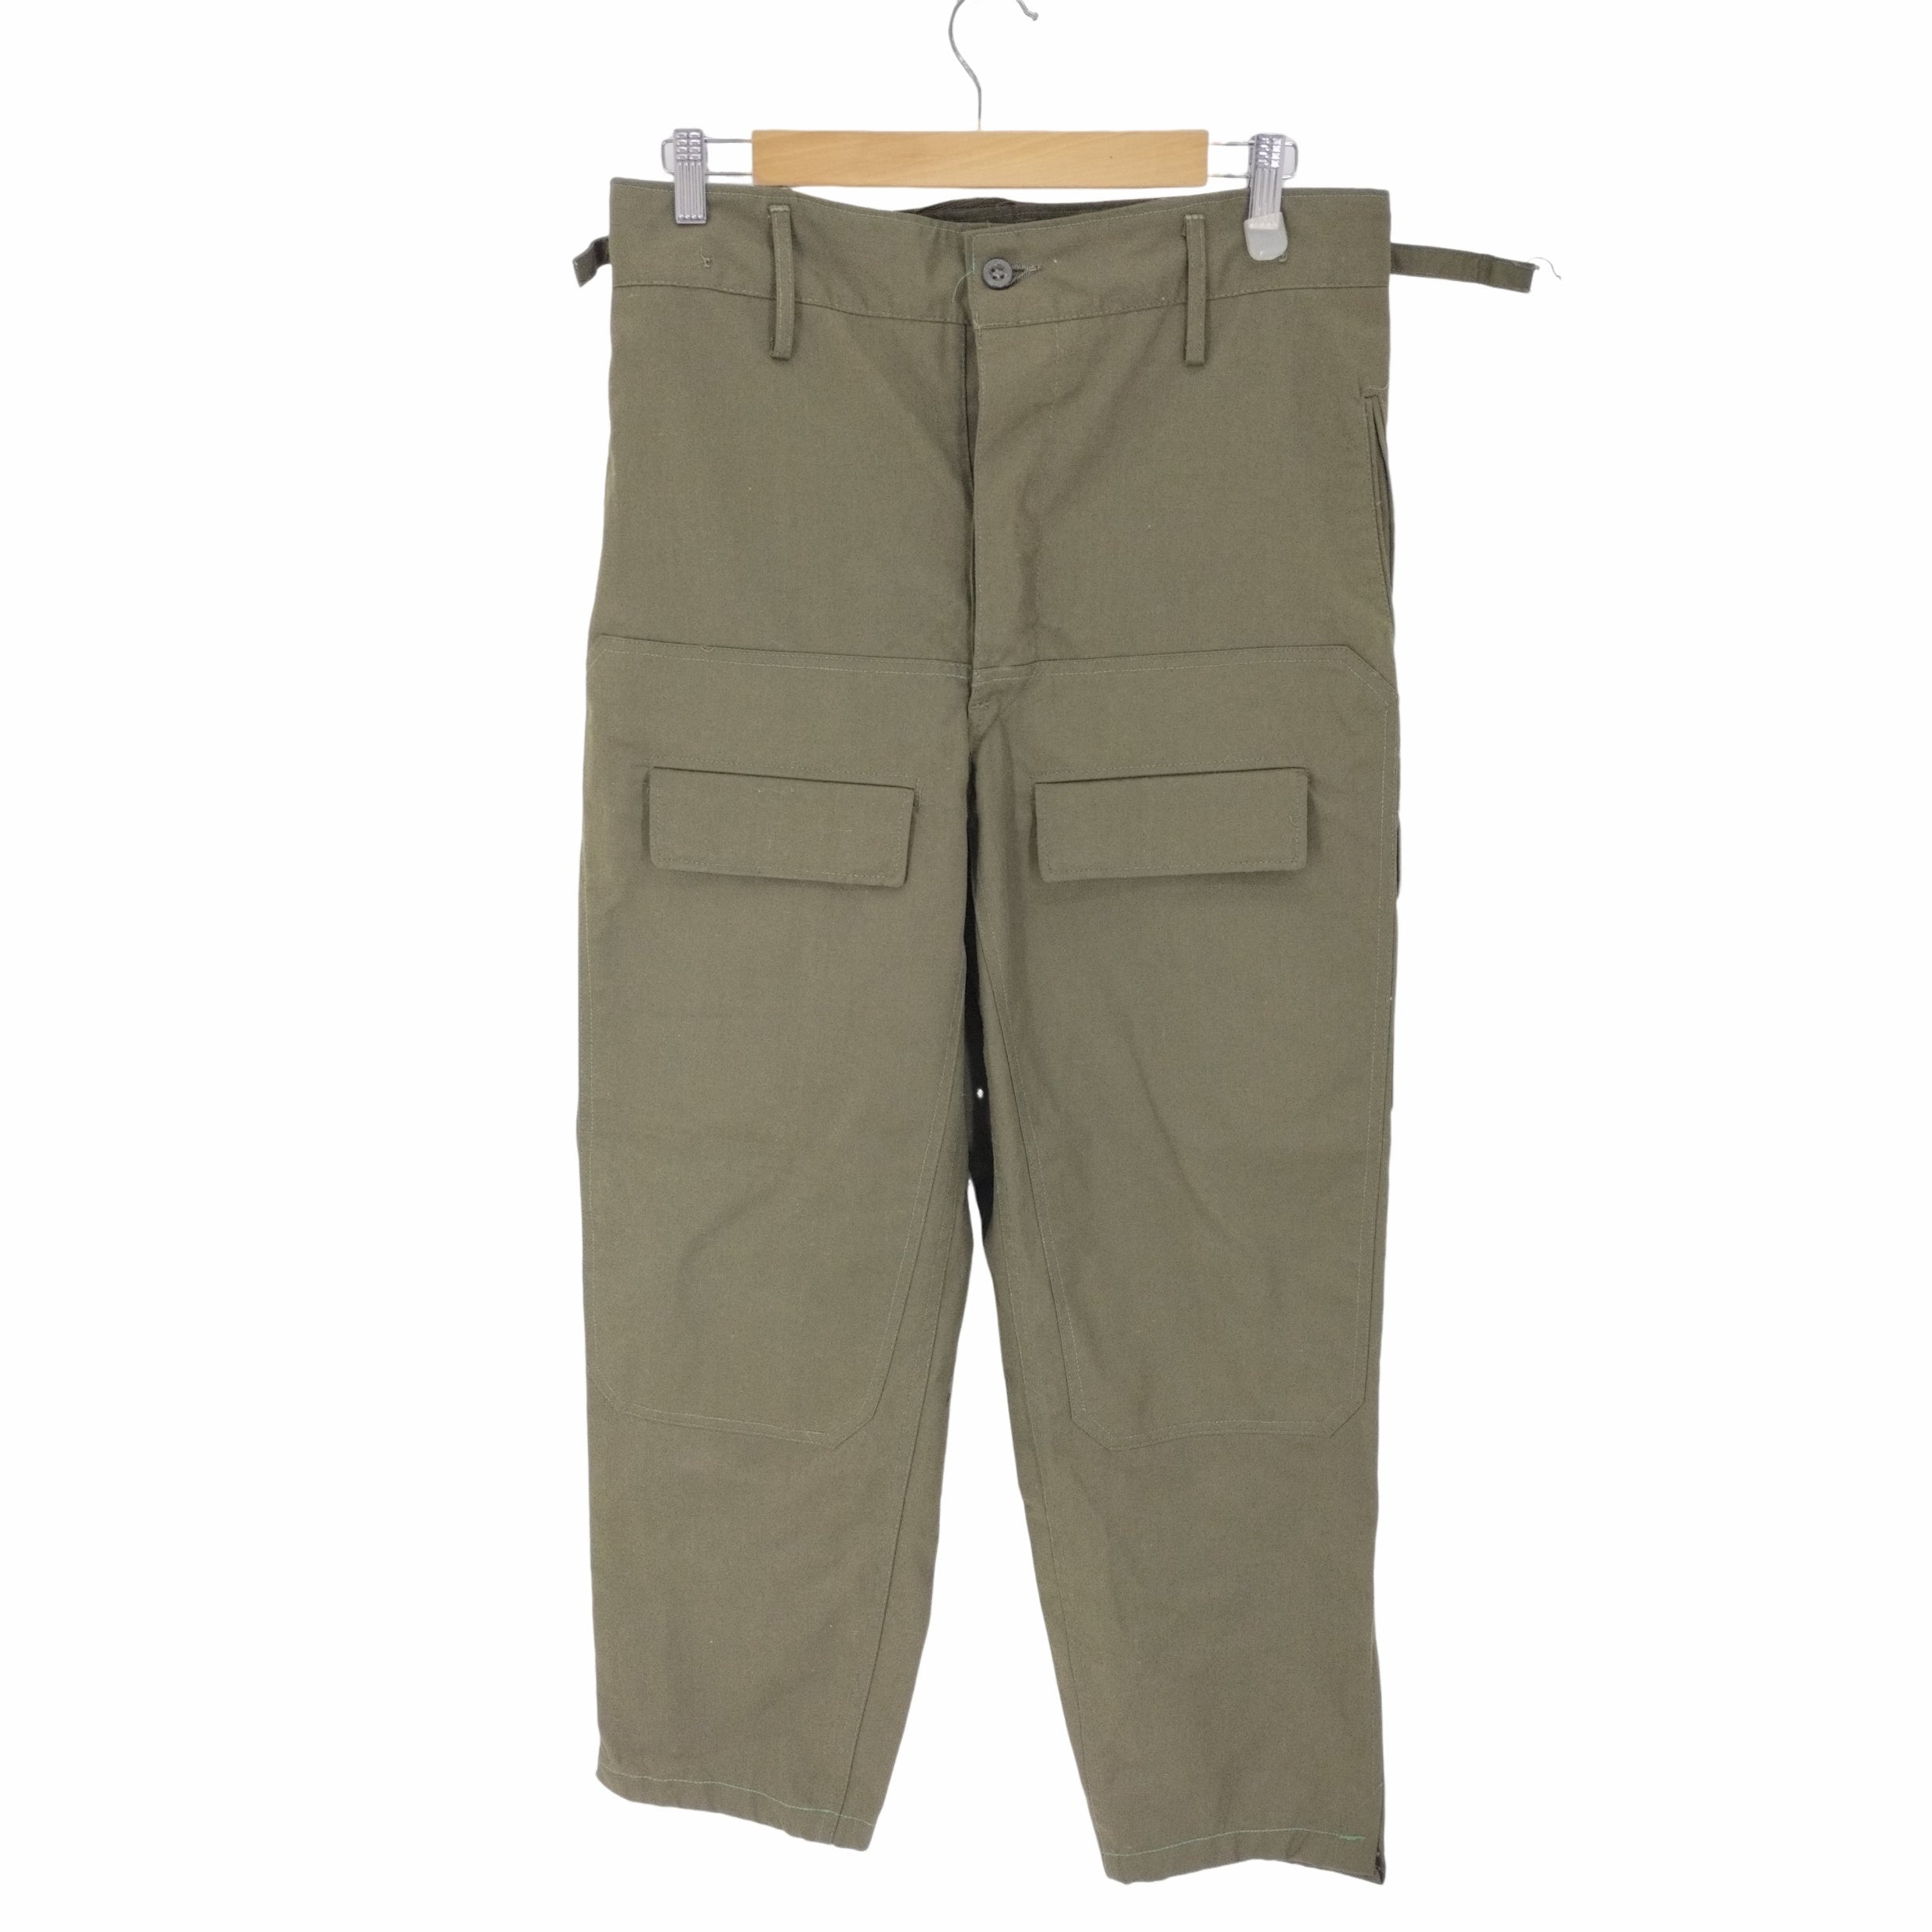 CZECH ARMY M-85 DOUBLE KNEEN FIELD CARGO PANT チェコ軍 M-85